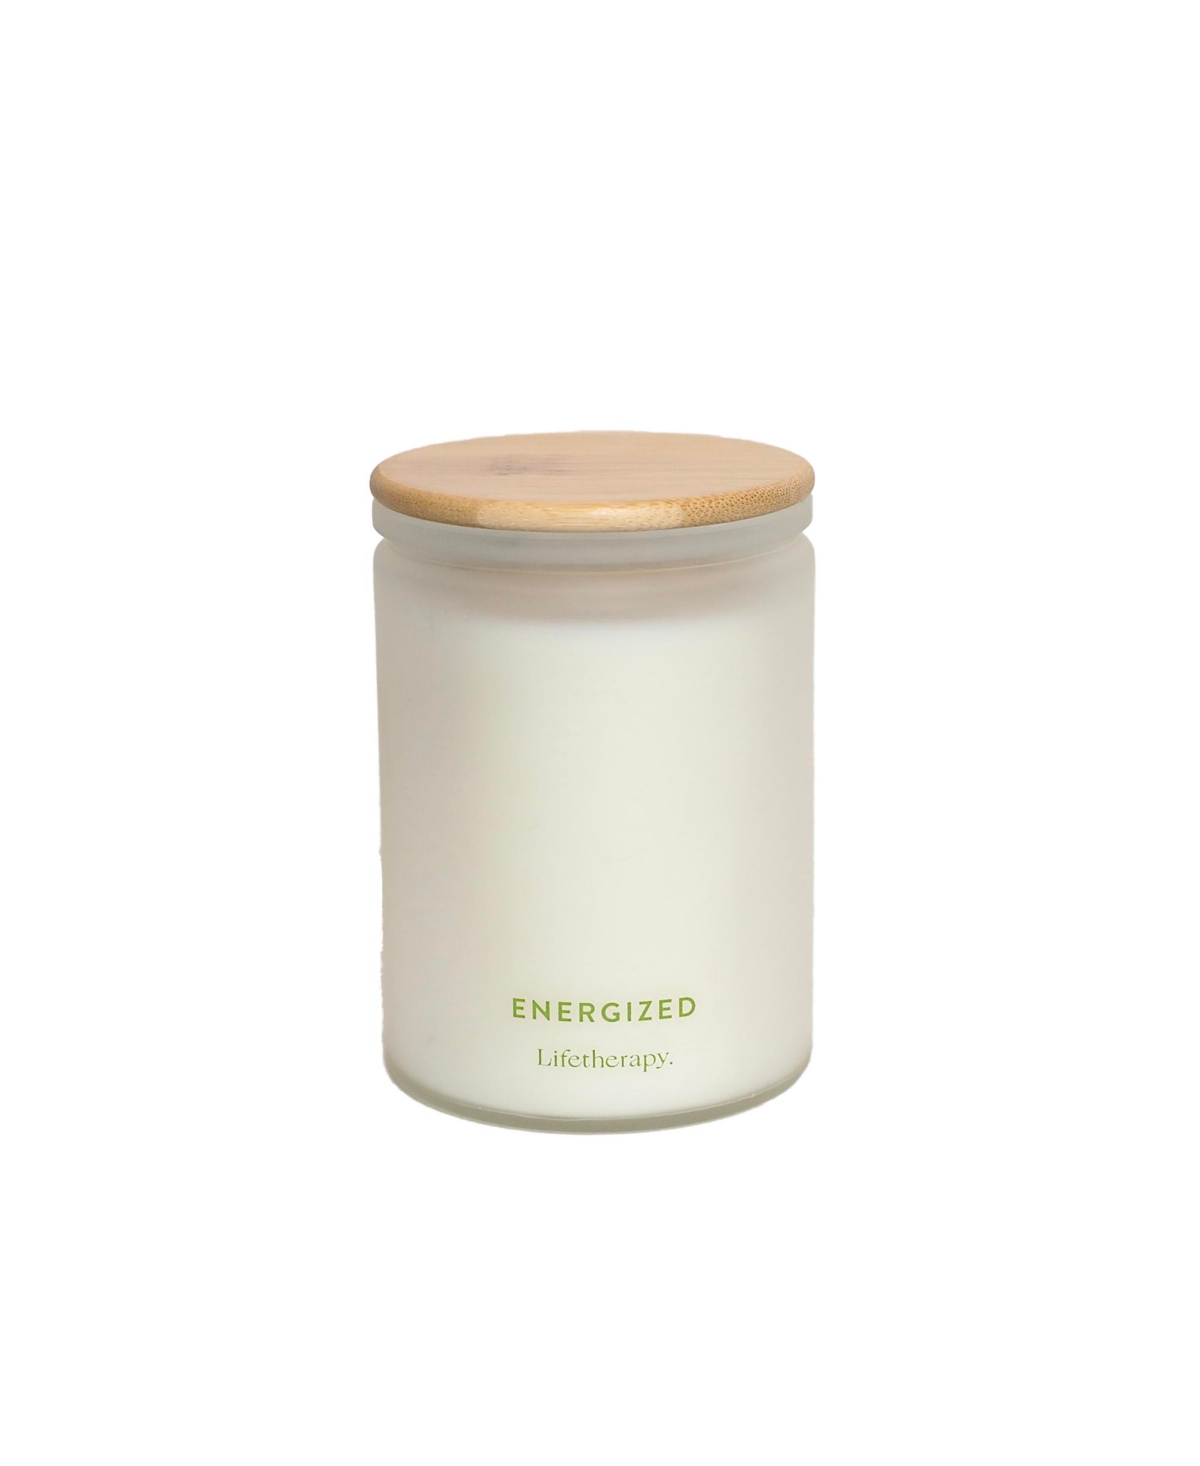 Energized Soy Wax Candle